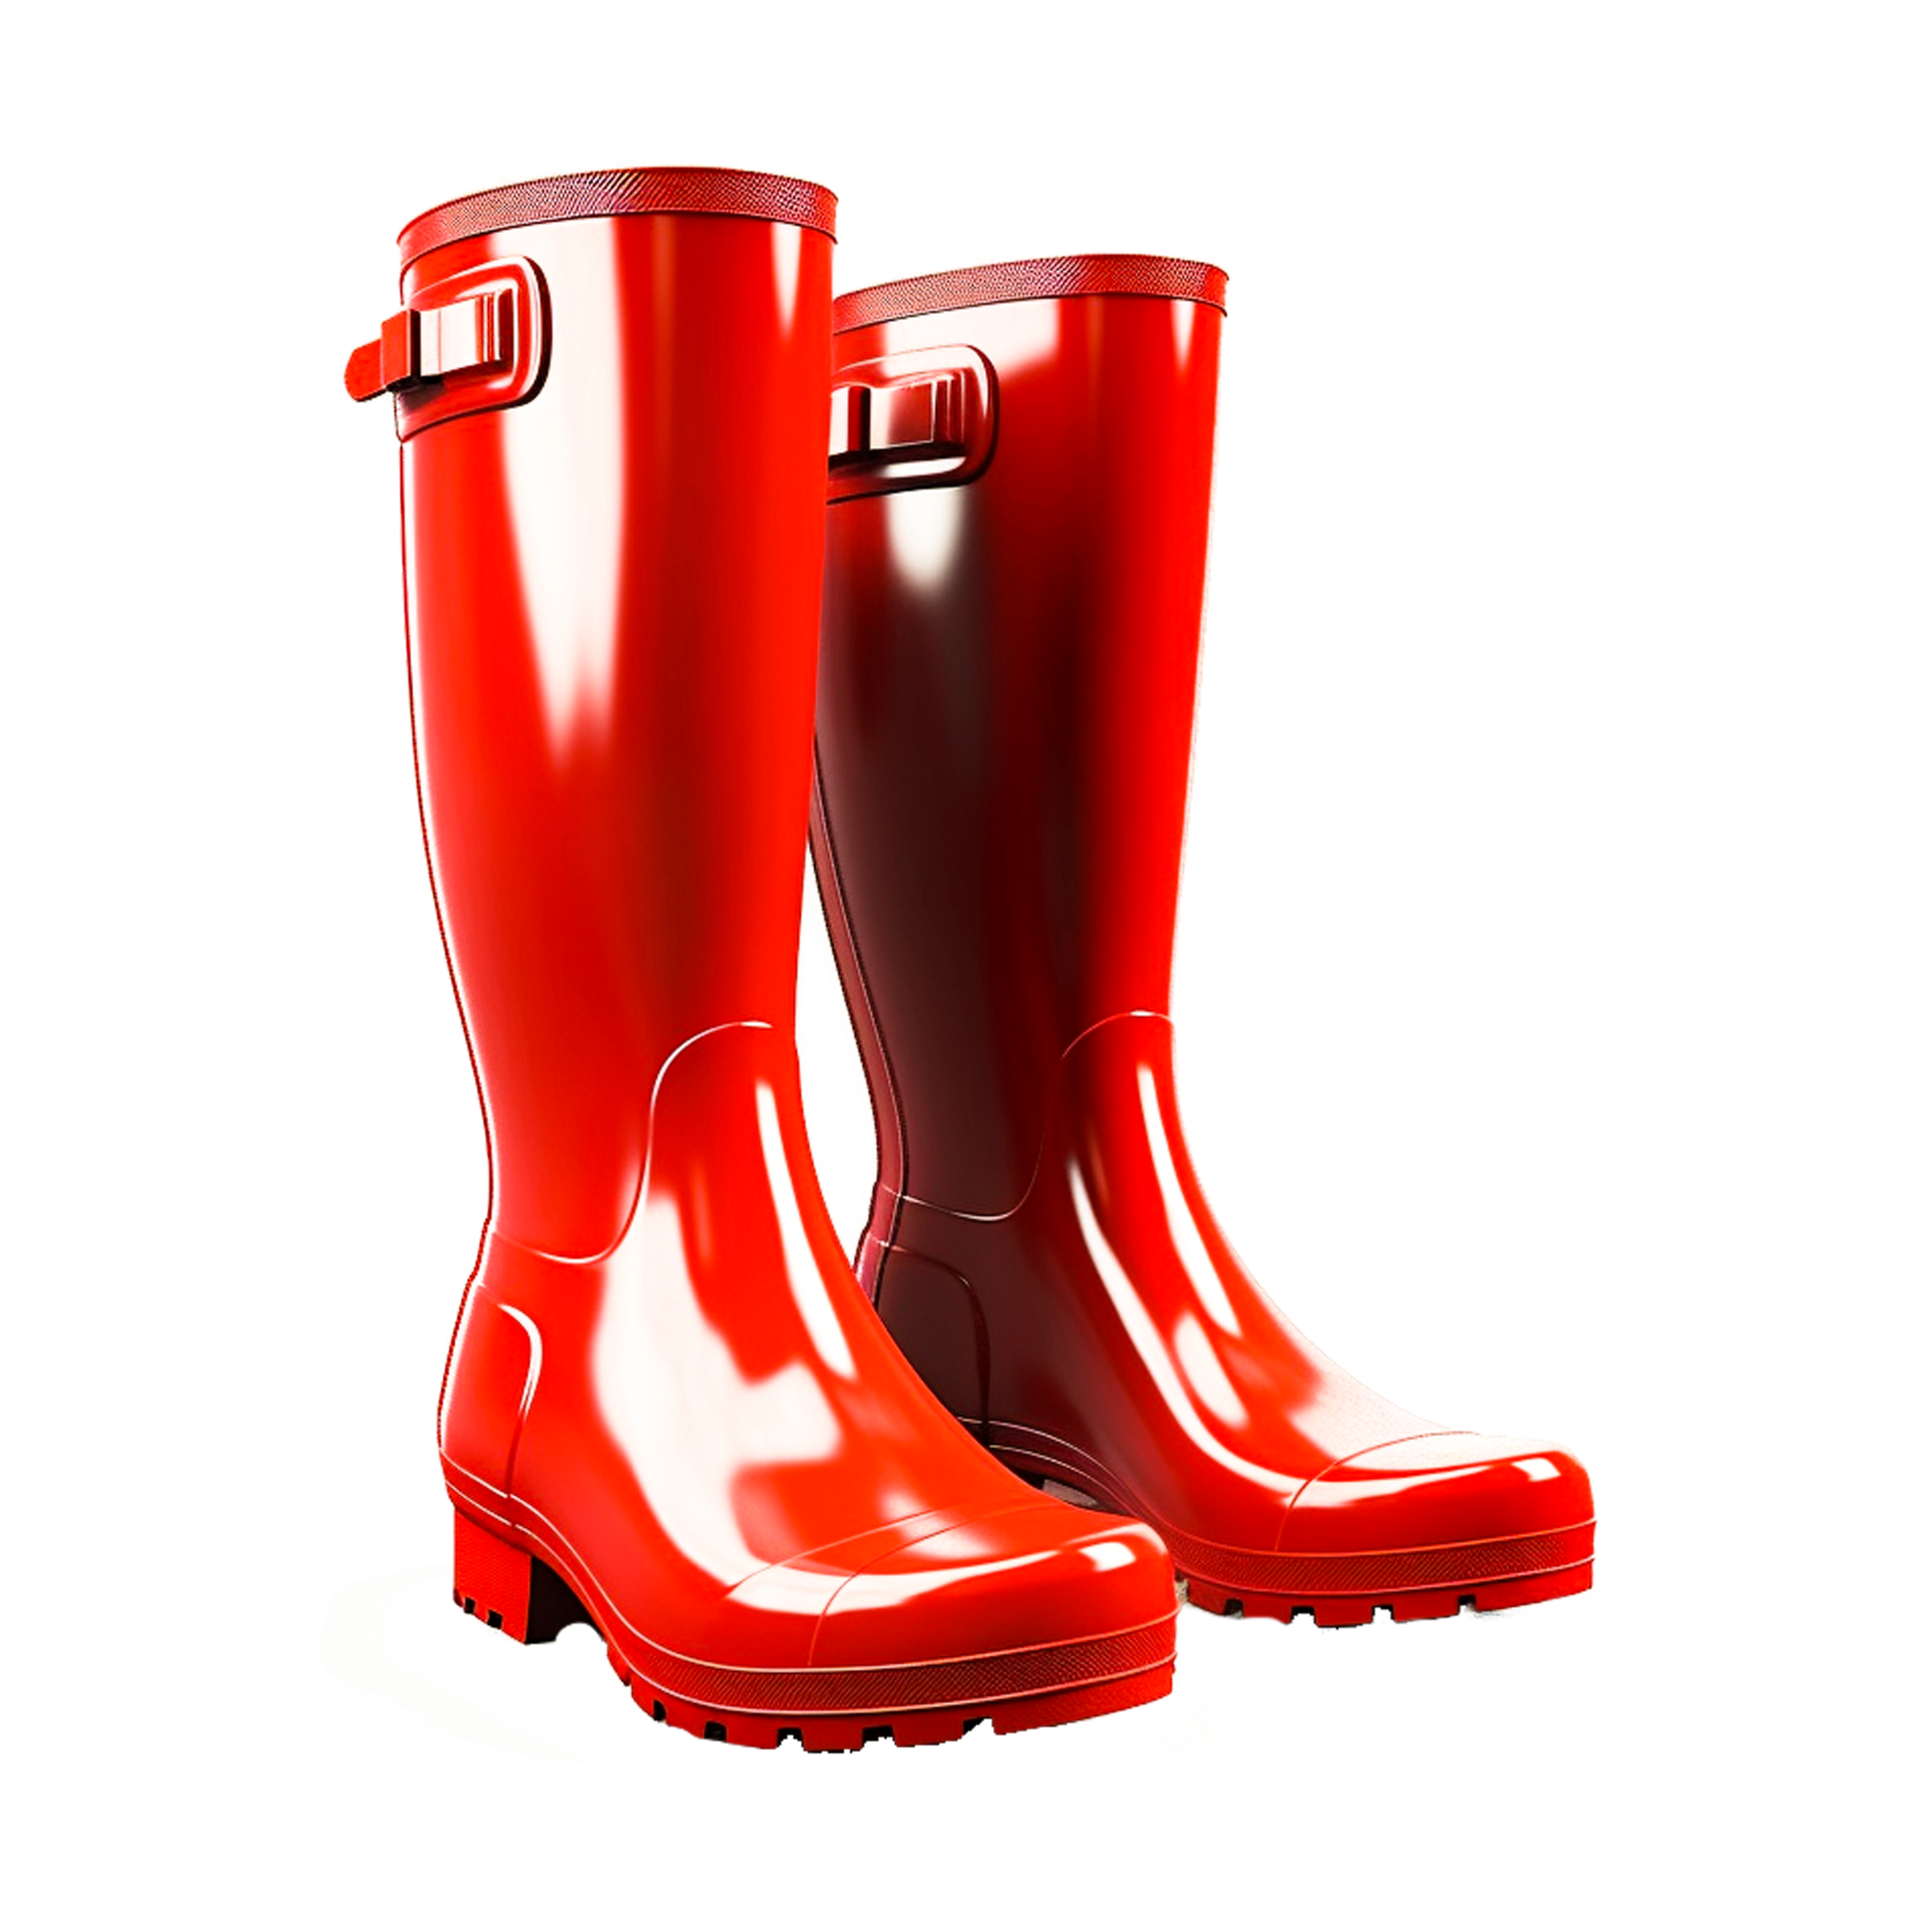 Wellington boot Shoe Fashion accessory, Big red boots, boots ...